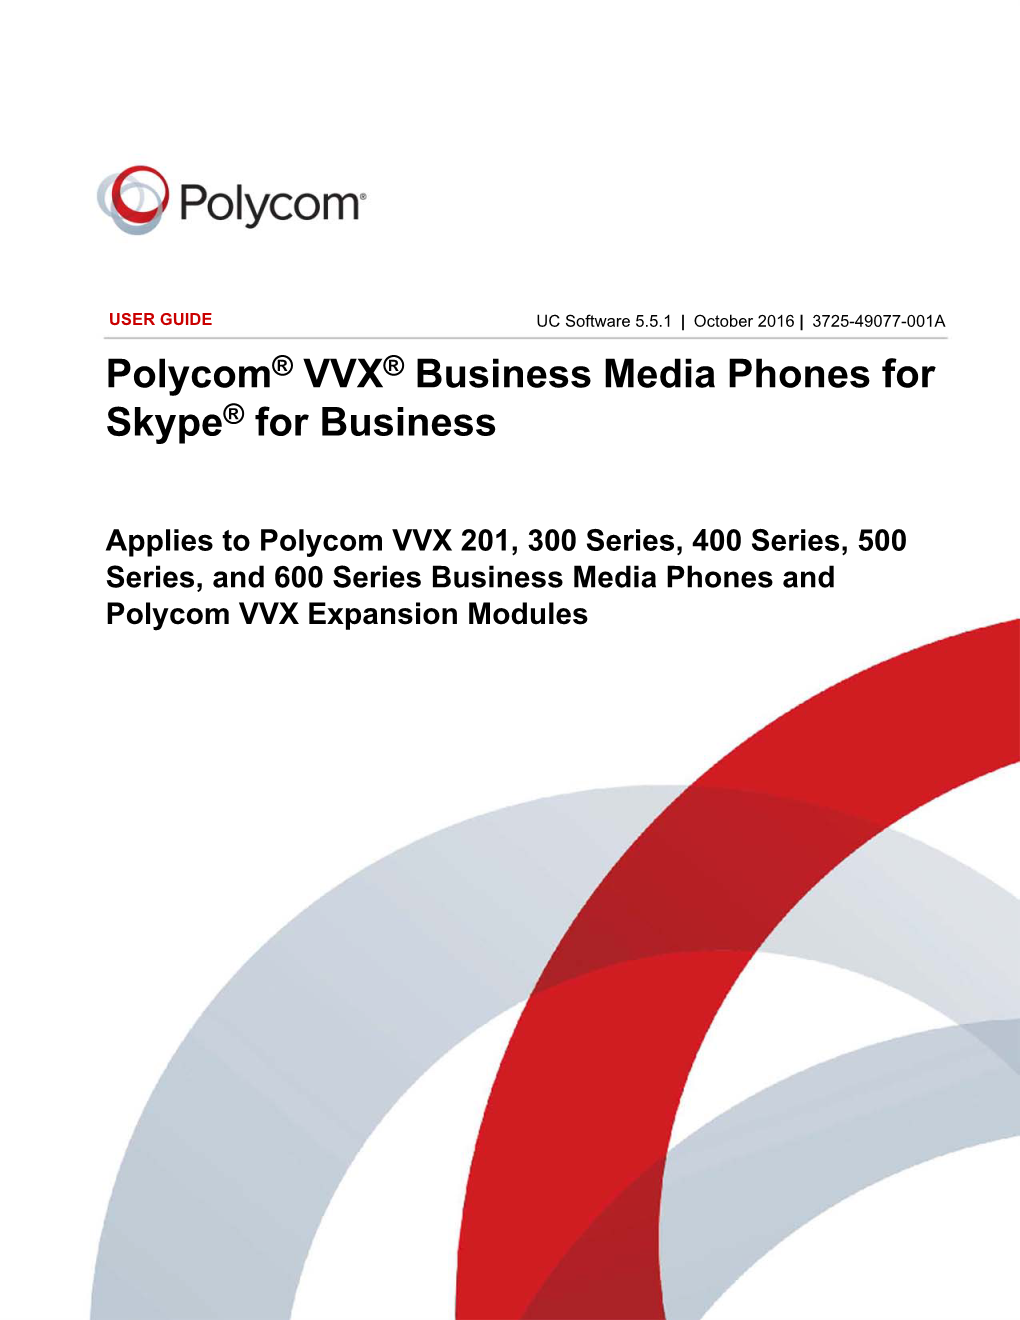 Polycom VVX Business Media Phones for Skype for Business User Guide Contains Overview Information for Navigating and Performing Tasks on VVX Business Media Phones